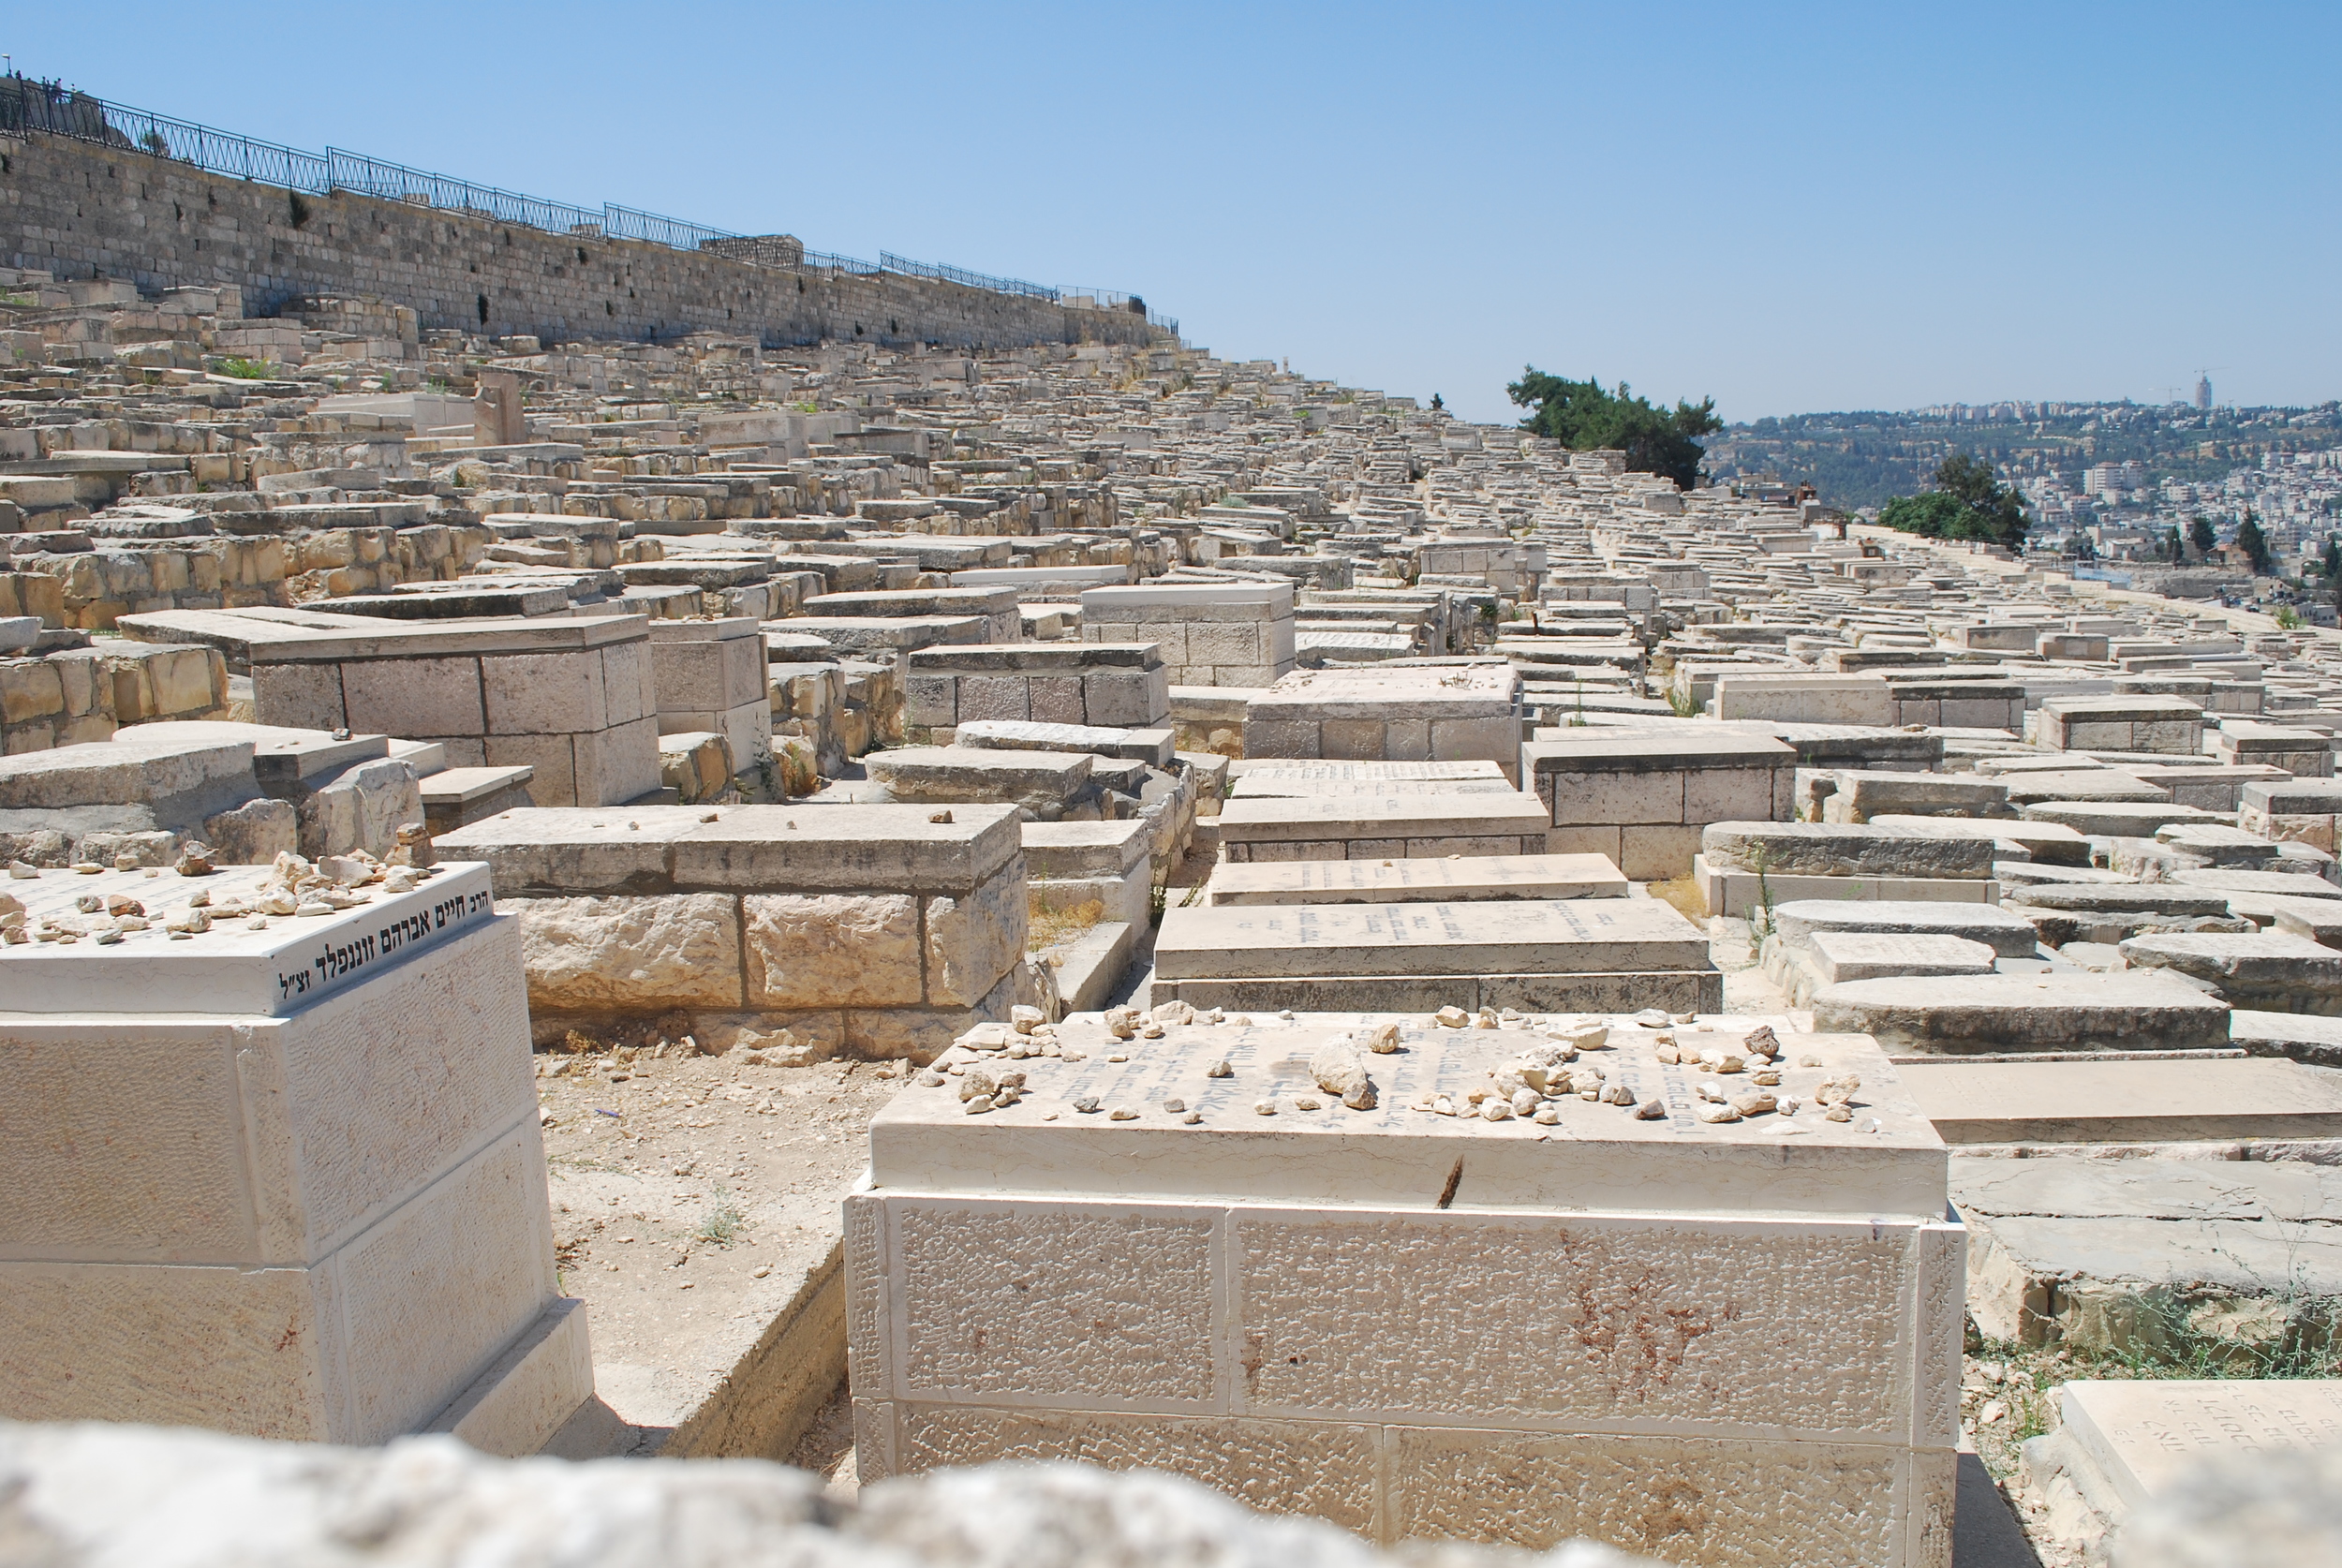  An ancient cemetery just outside the city and surrounding the Mount of Olives. 